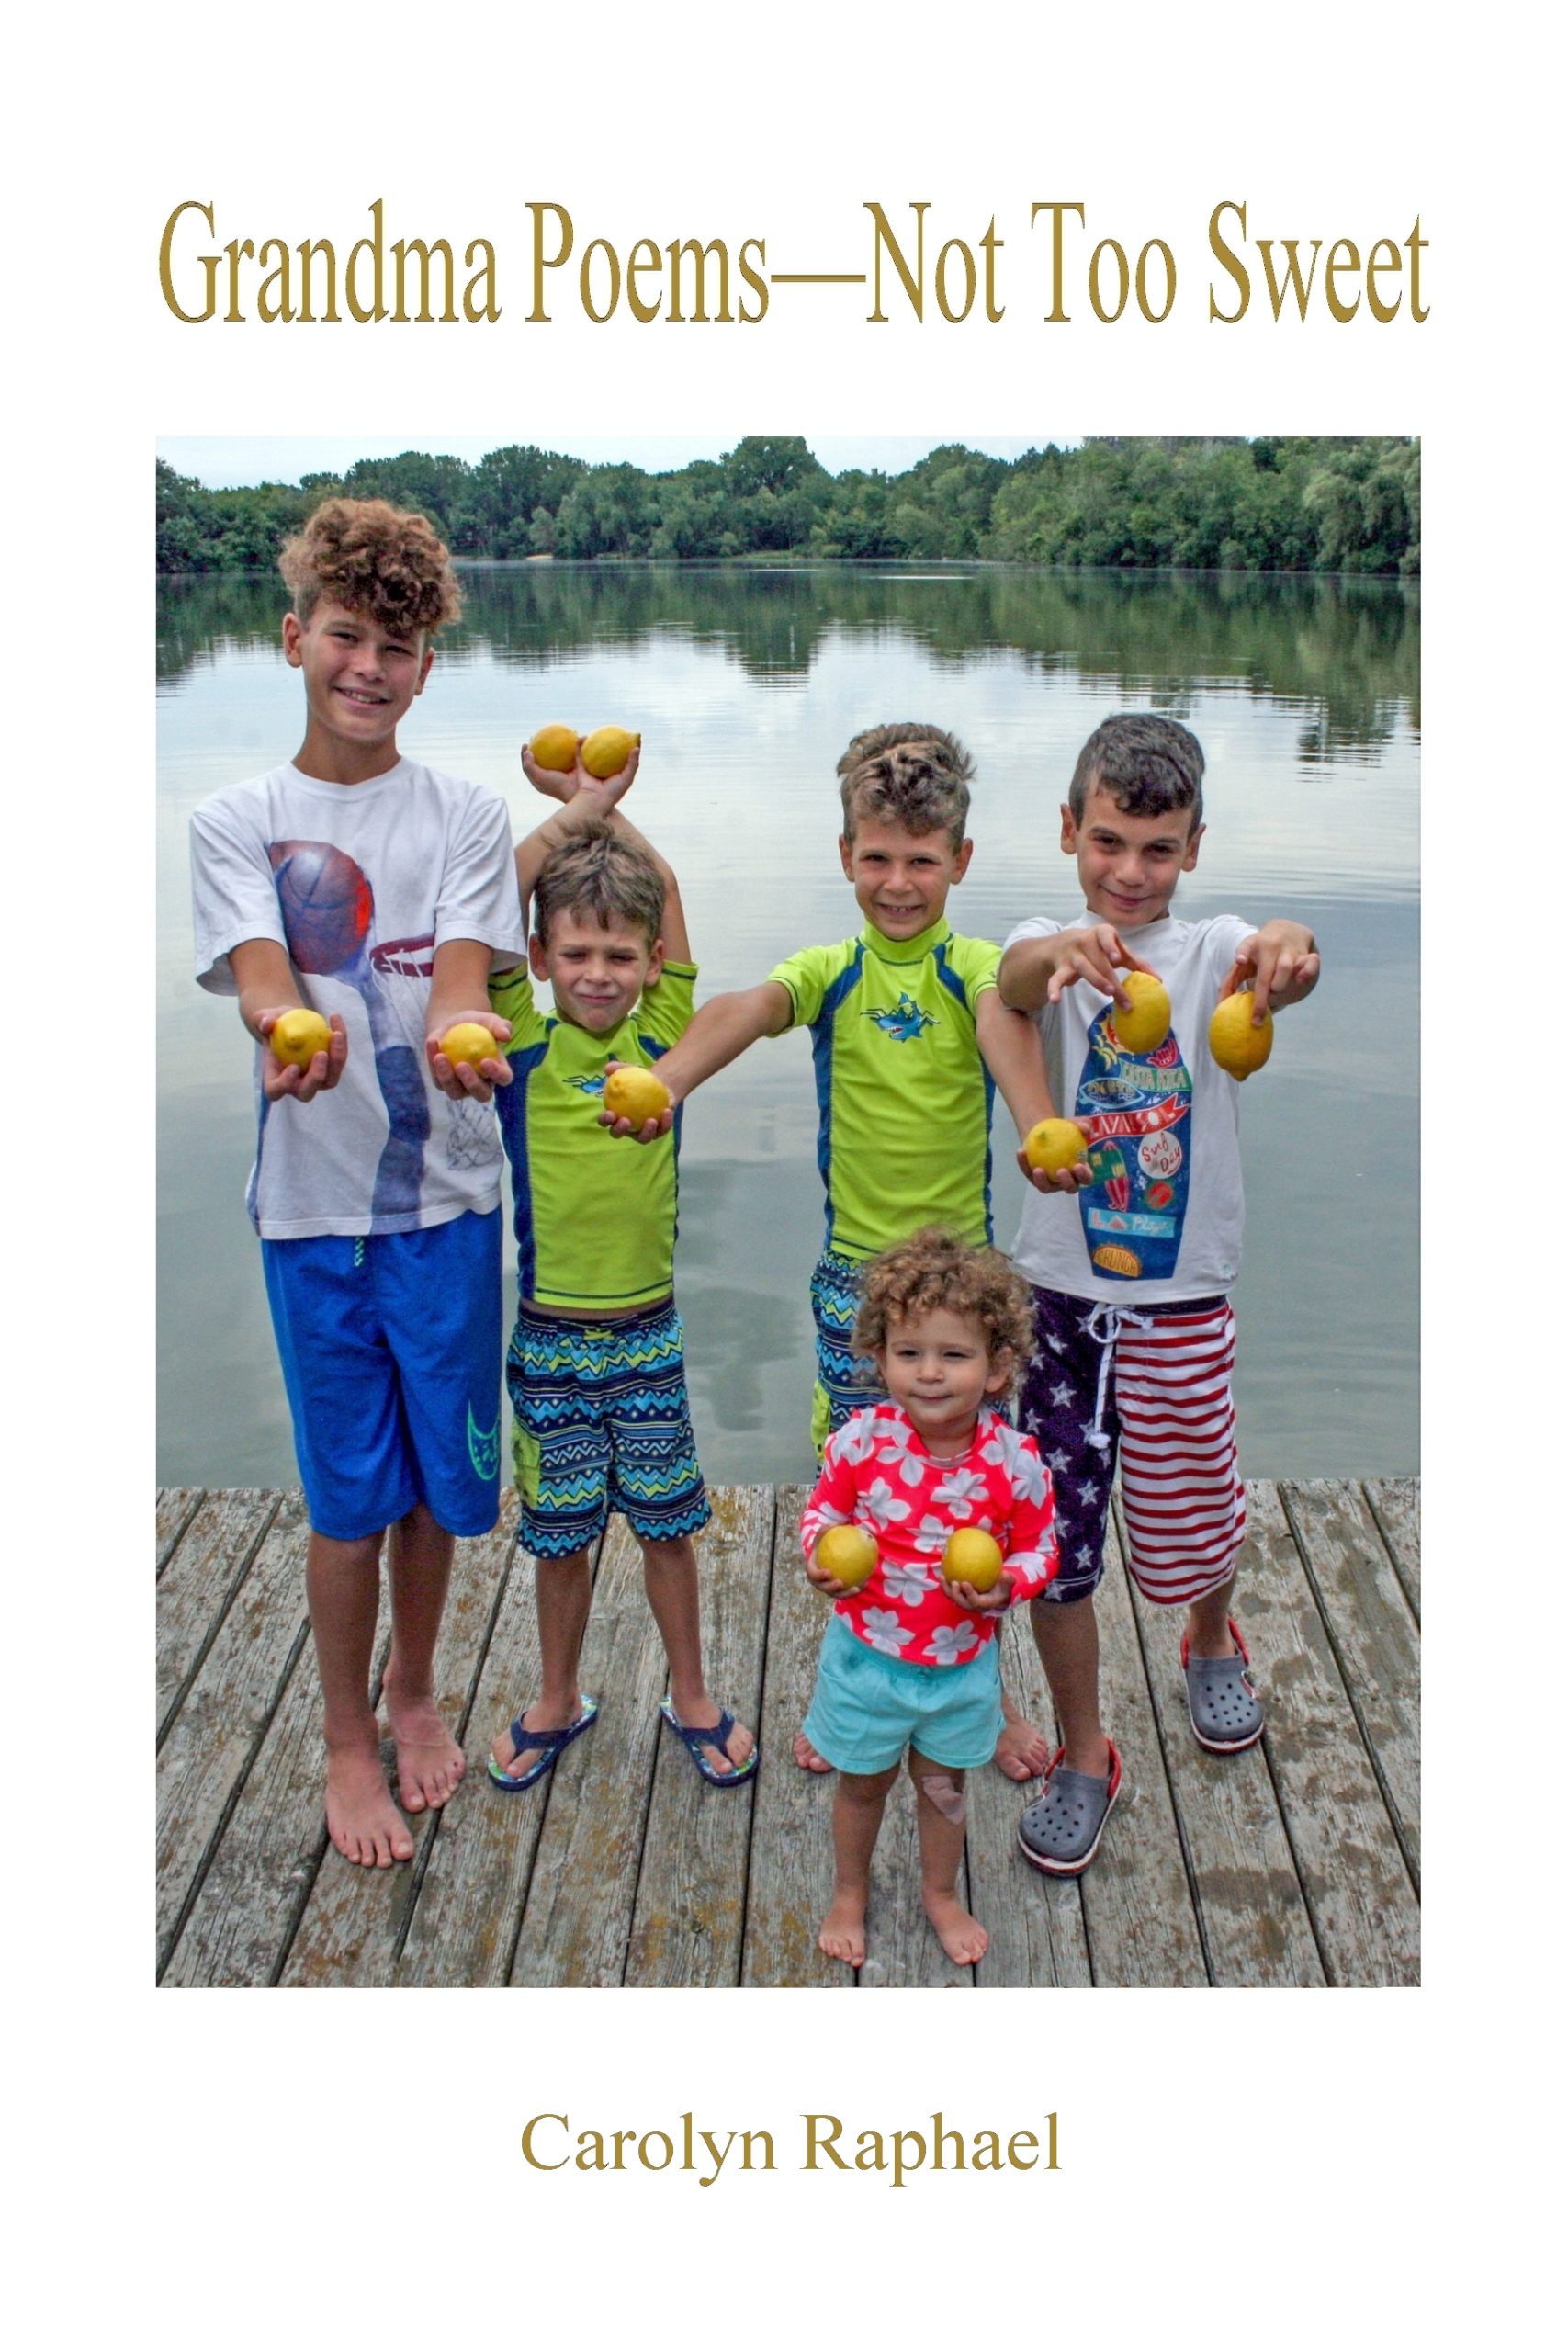 The cover of "Grandma Poems - Not Too Sweet" by Carolyn Raphael, which features her five grandchildren holding lemons, alludes to the sweet, but not too sweet theme of the book. (Photo courtesy of Carolyn Raphael)